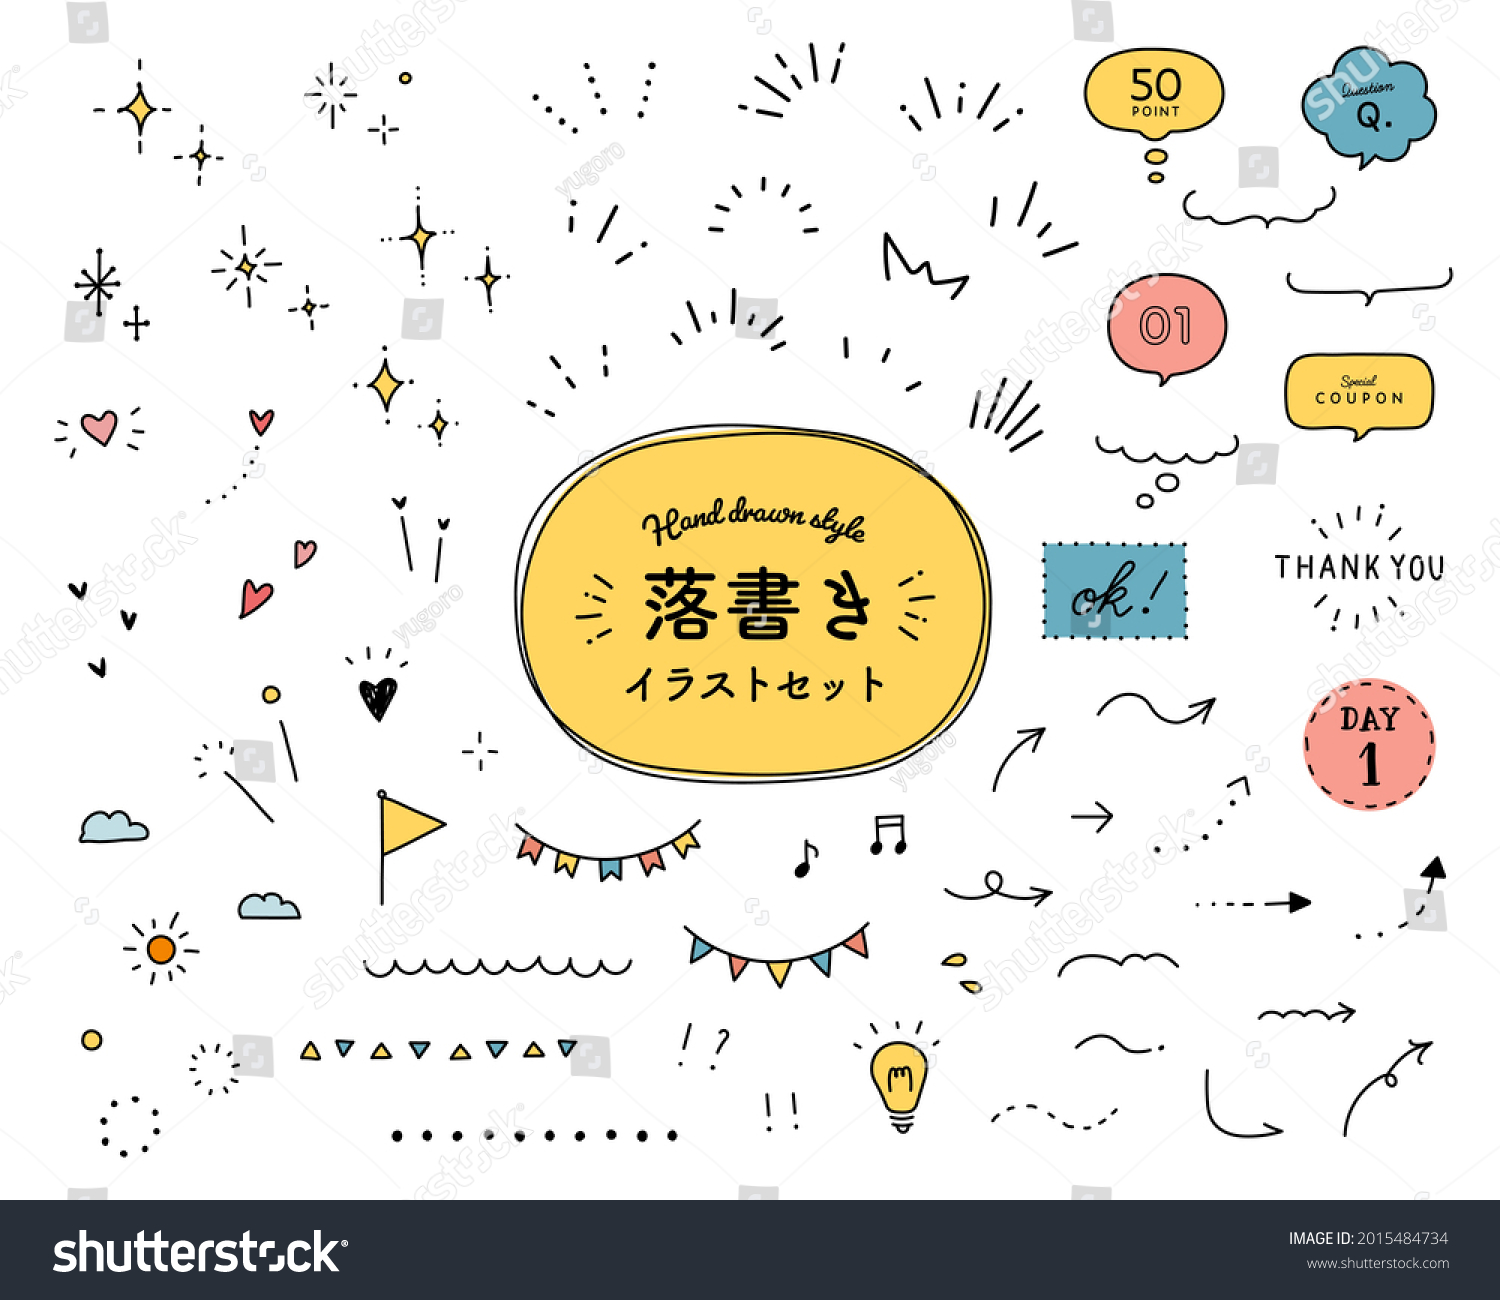 stock-vector-a-set-of-doodle-illustrations-the-japanese-word-means-the-same-as-the-english-title-the-2015484734